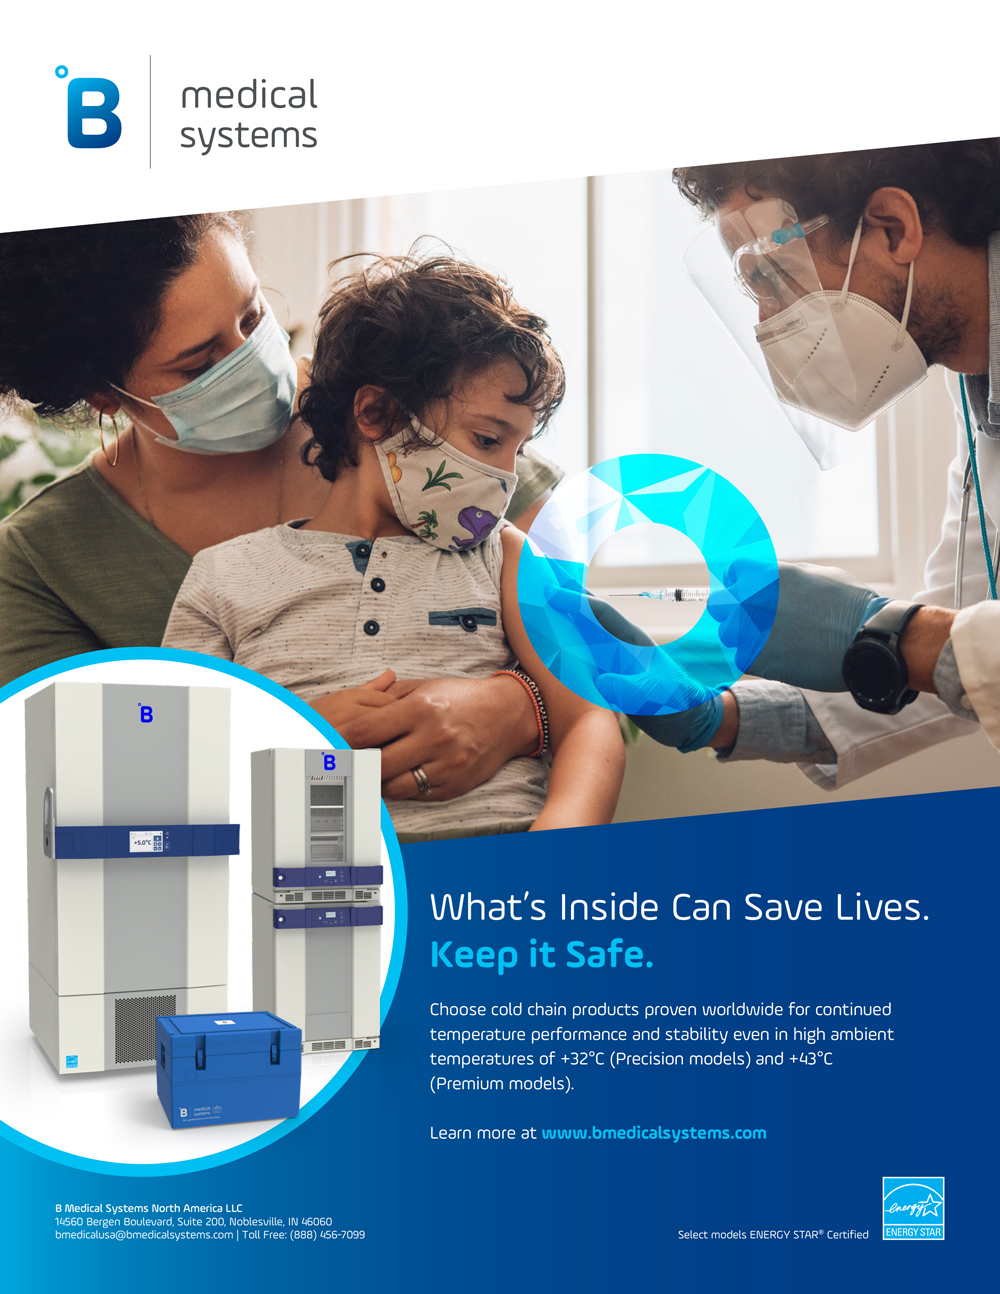 B Medical Systems Ad Series